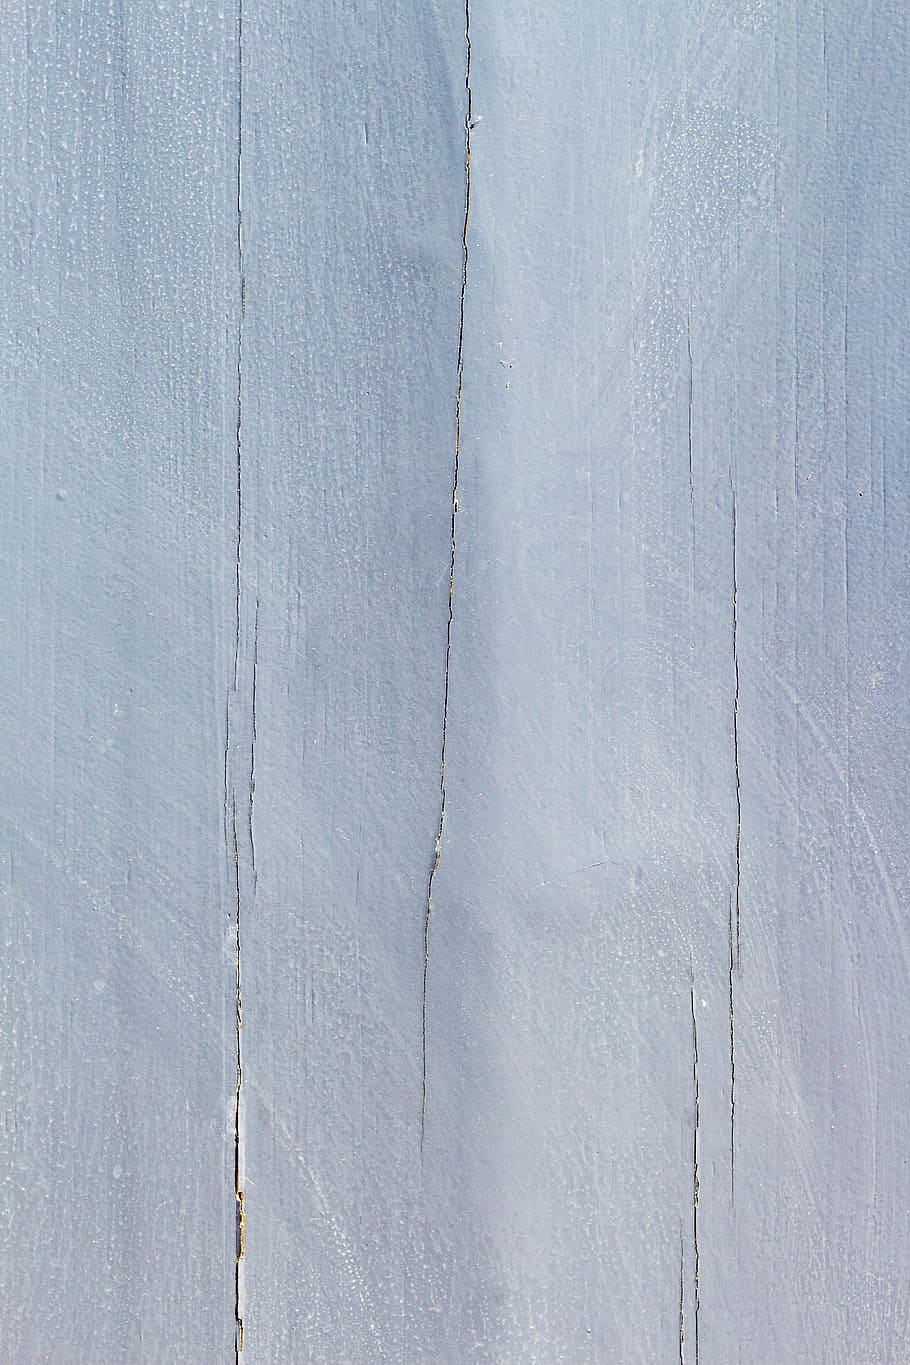 background, pattern, wood, old, structure, texture, textures, HD wallpaper